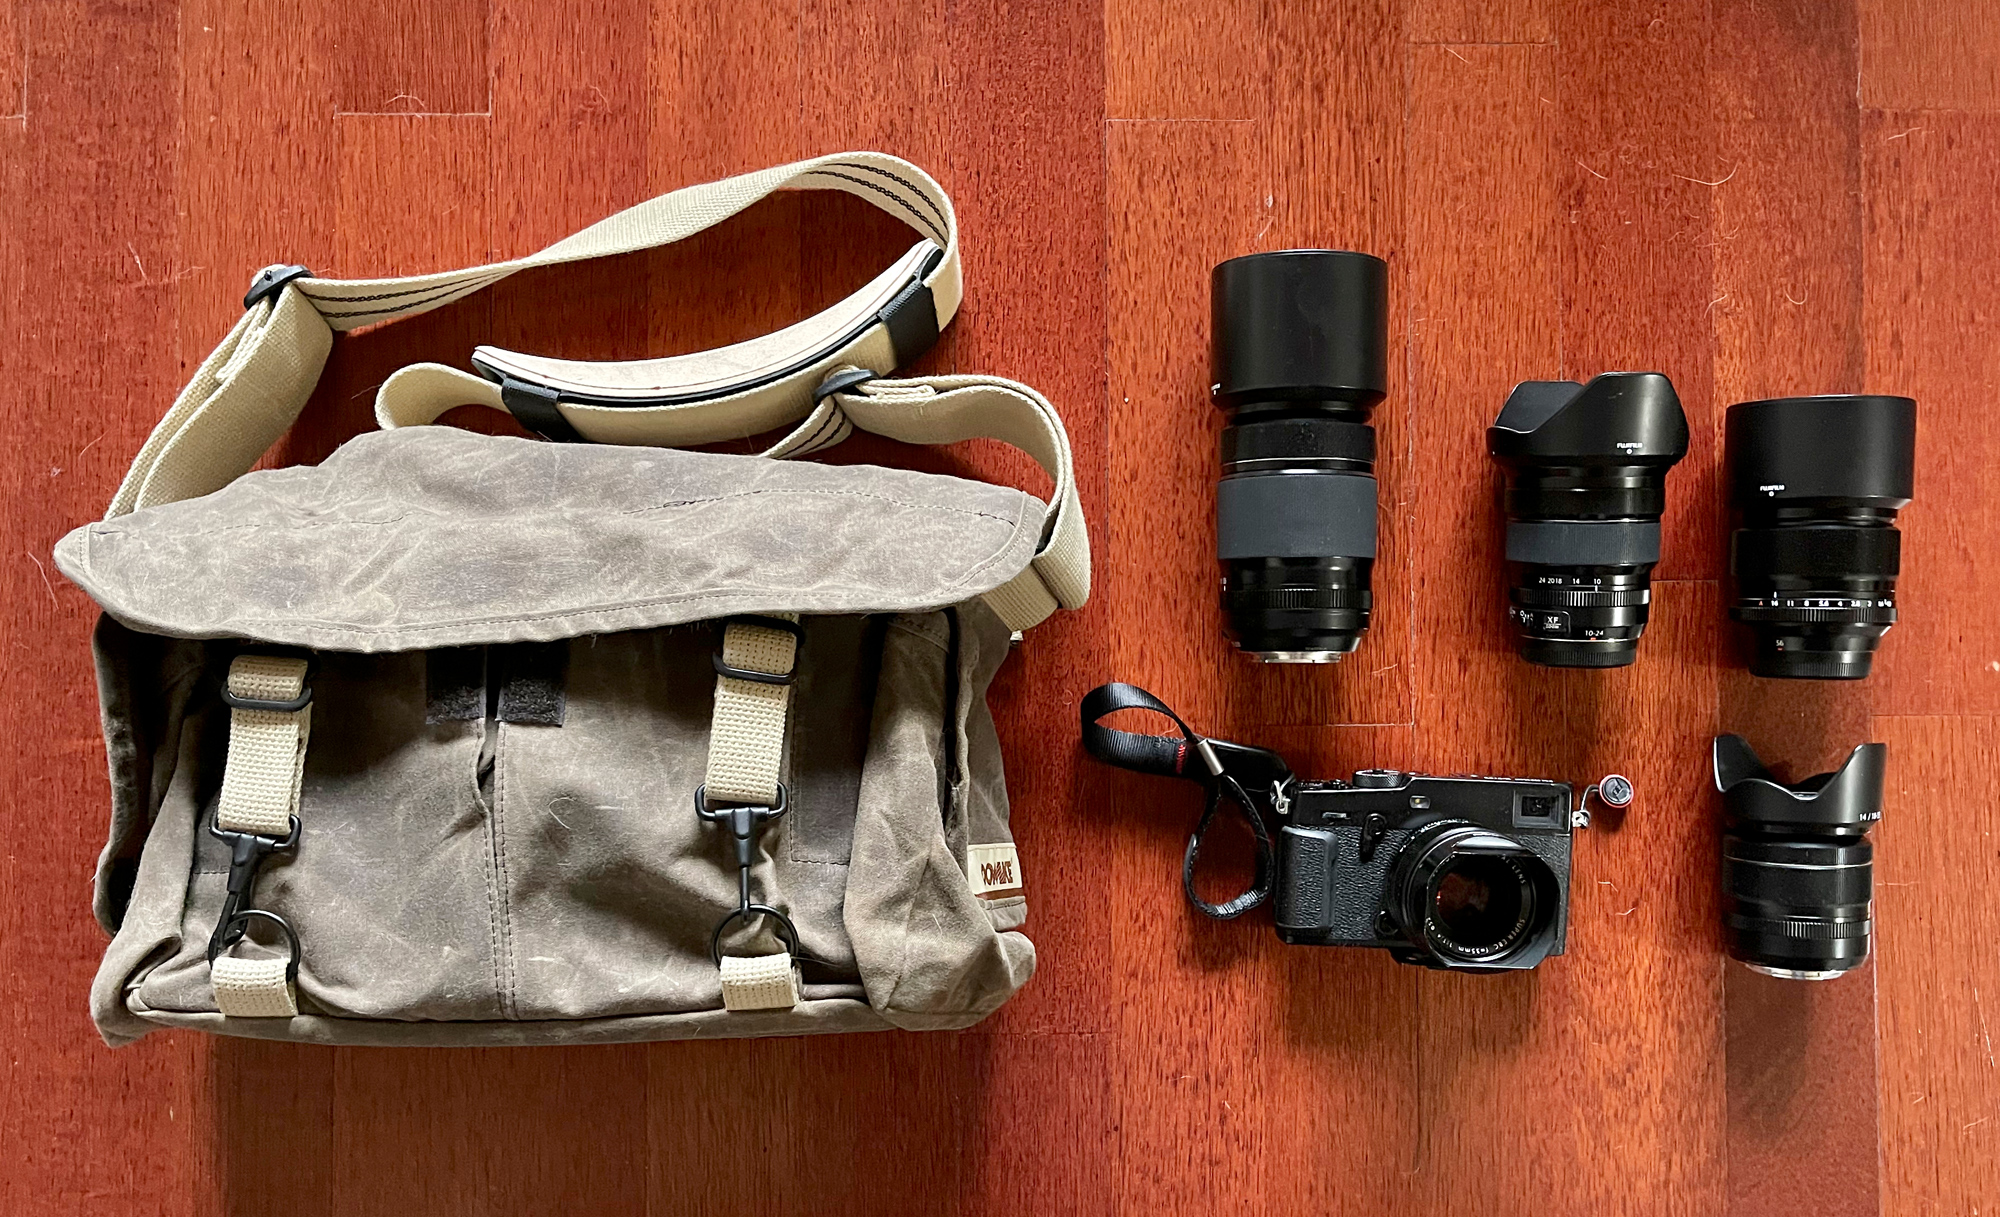 My former Fuji X-Pro3 kit. A 55-200mm, 10-24mm, 56mm 1.2, 35mm 1.4, 18-55mm. All of these fits into one of the best camera bags of all time the Domke bag.